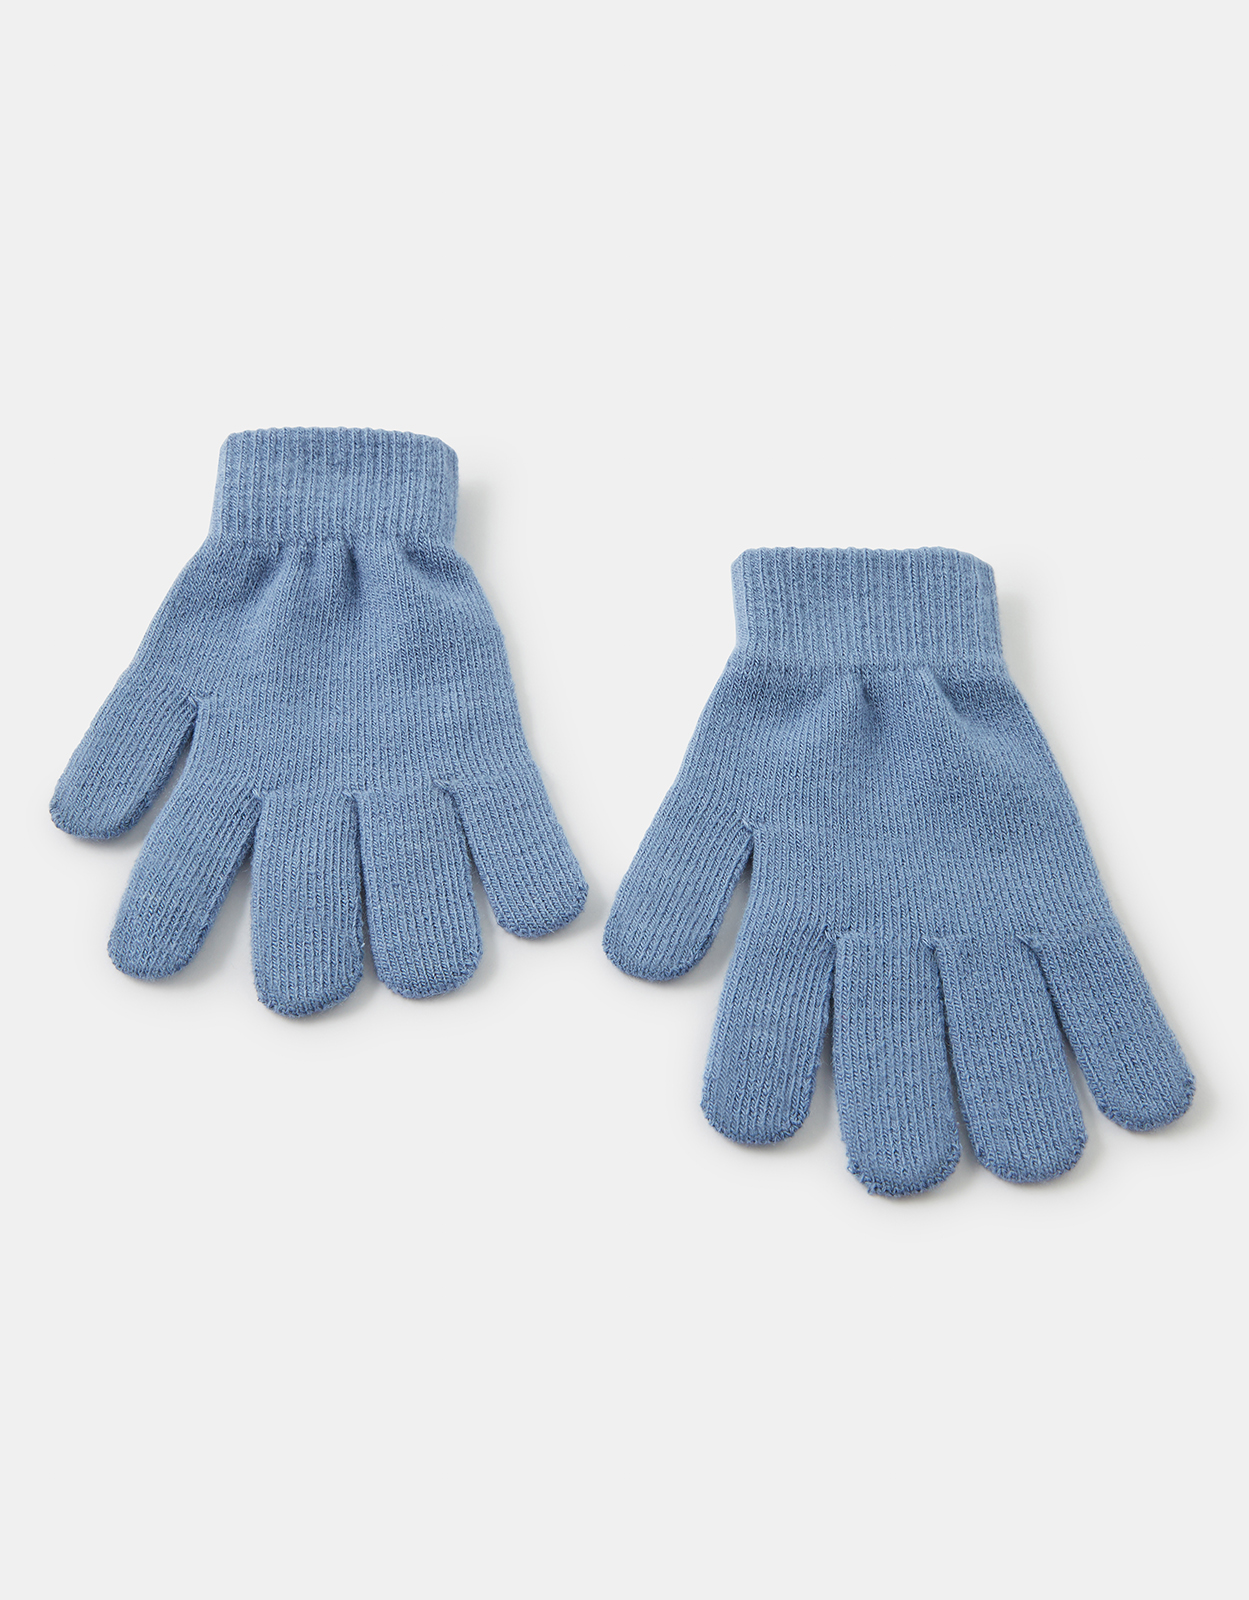 Accessorize Super-Stretchy Touchscreen Gloves